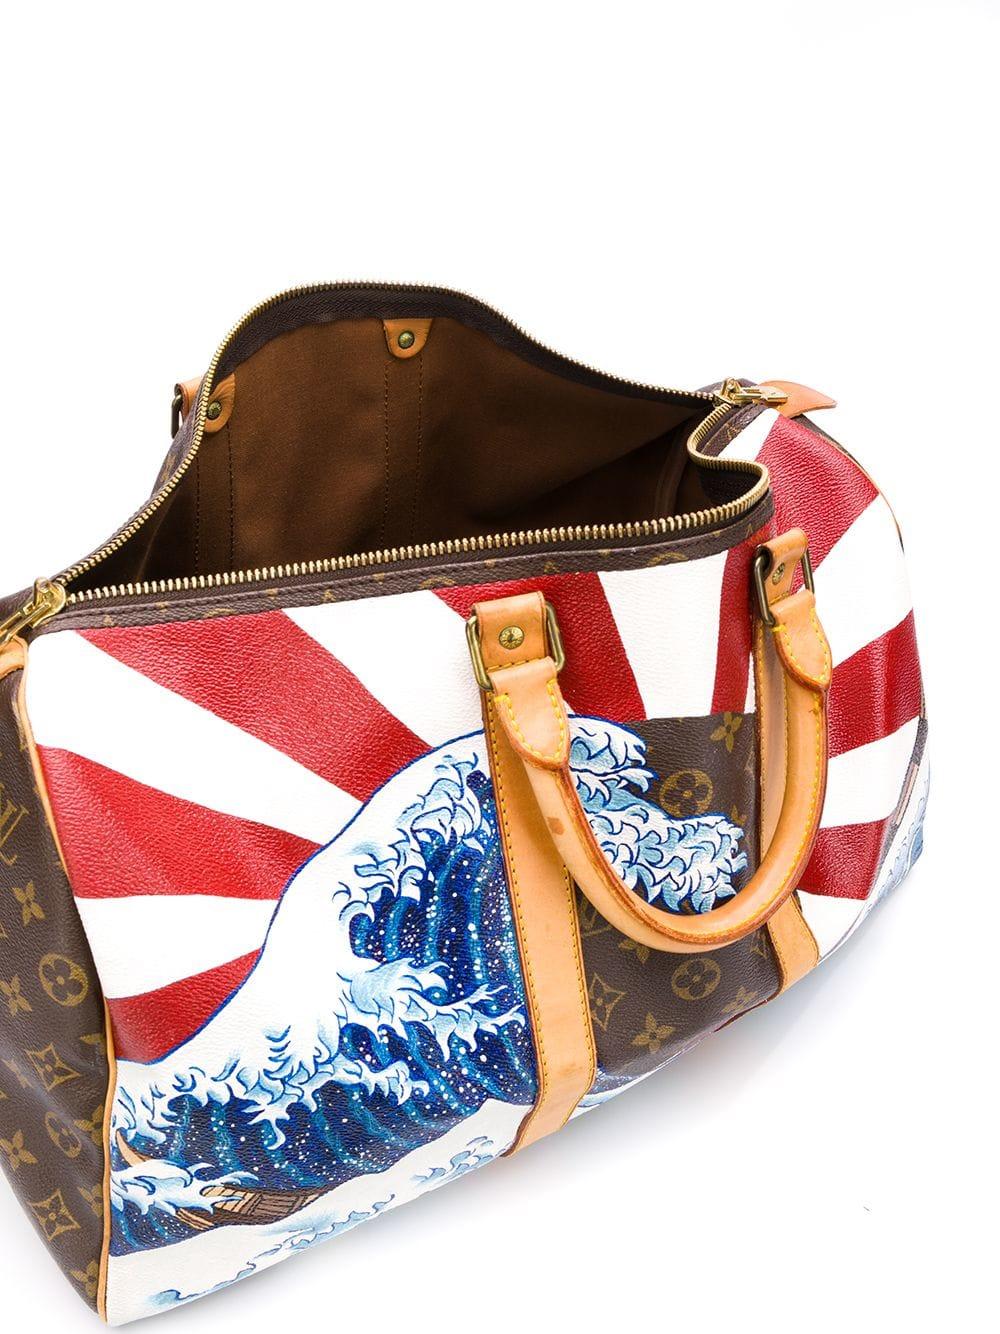 This hand-painted Louis Vuitton 'Japanese Wave' Keepall bag from Rewind's Emotional Baggage collection, where iconic handbags are specially customised with hand-painted illustrations. Crafted in Monogram Canvas leather and accented by gold-tone